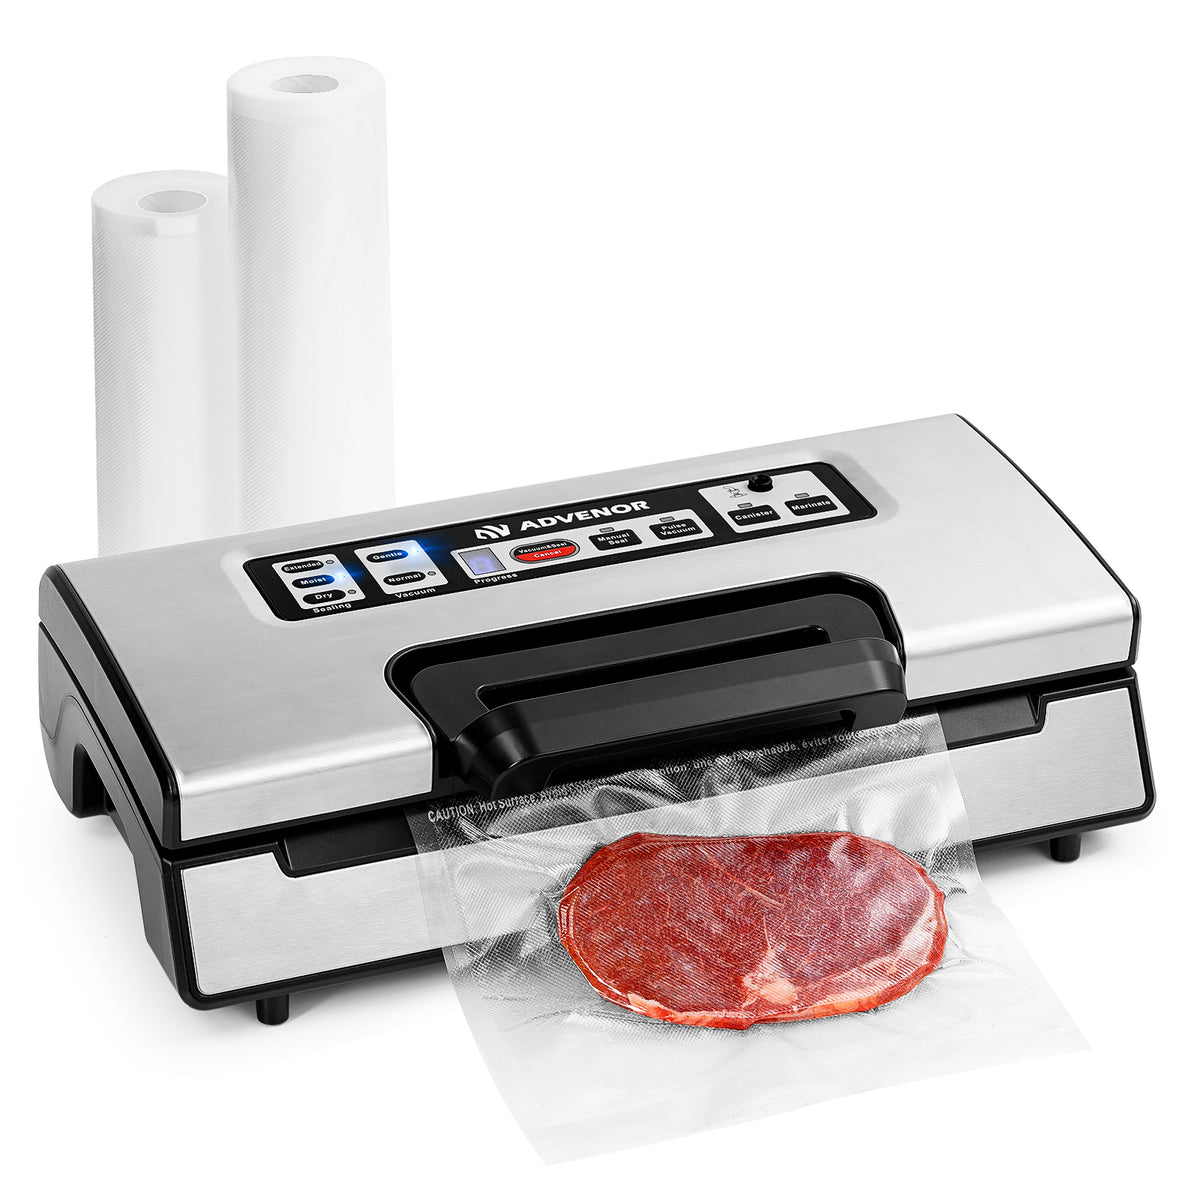 ADVENOR Vacuum Sealer Pro Food Sealer with Built-in Cutter and Bag Storage  Includes 2 Bag Rolls 8x16'and 11x16' Handle Lock Design 90kpa Double Heat